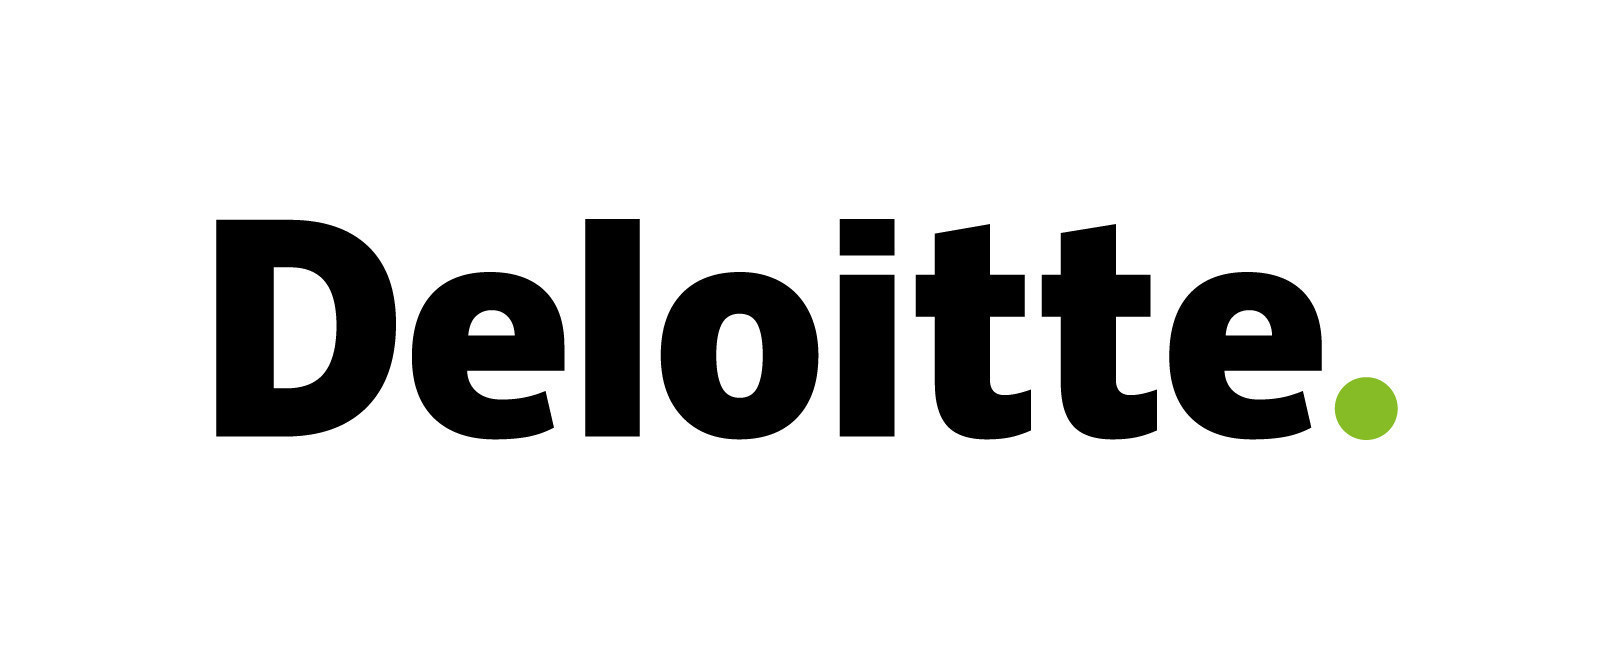 As used in this document, "Deloitte" means Deloitte LLP. Please see  www.deloitte.com/us/about for a detailed description of the legal structure of Deloitte LLP and its subsidiaries. Certain services may not be available to attest clients under the rules and regulations of public accounting. (PRNewsFoto/Deloitte)